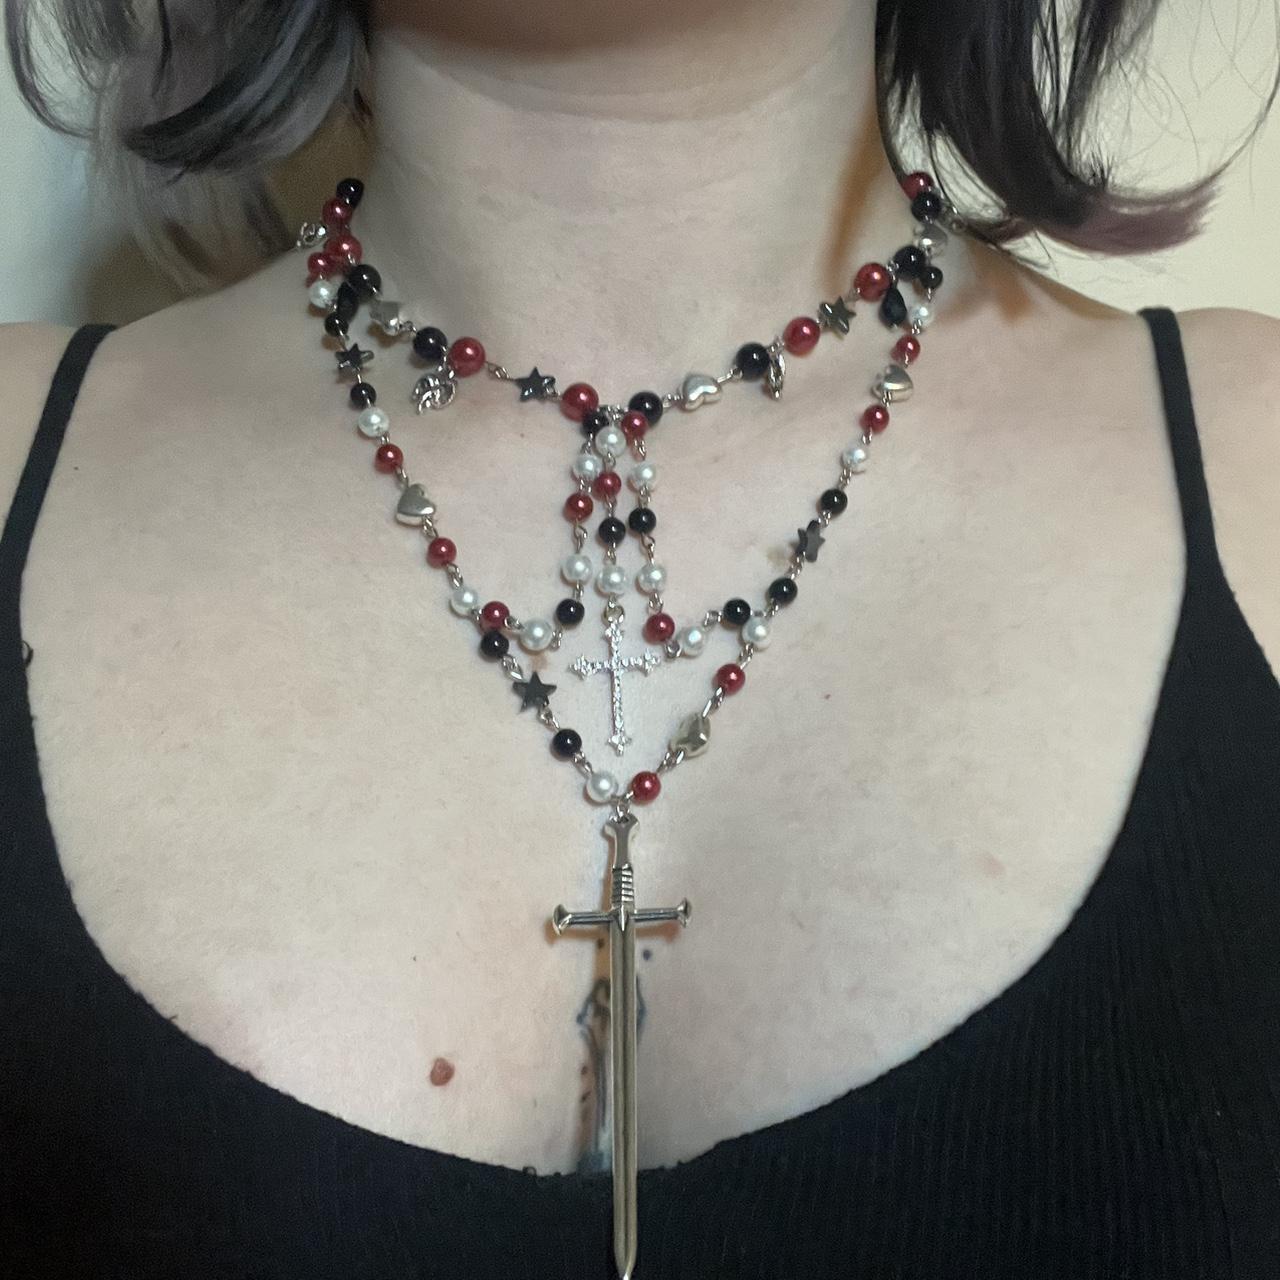 Buy Goth Black Rosary Necklace, Gothic Jewelry, Gothic Cross Necklace,  Gothic Black Rosary Beads, Whimsigoth Necklace Online in India - Etsy